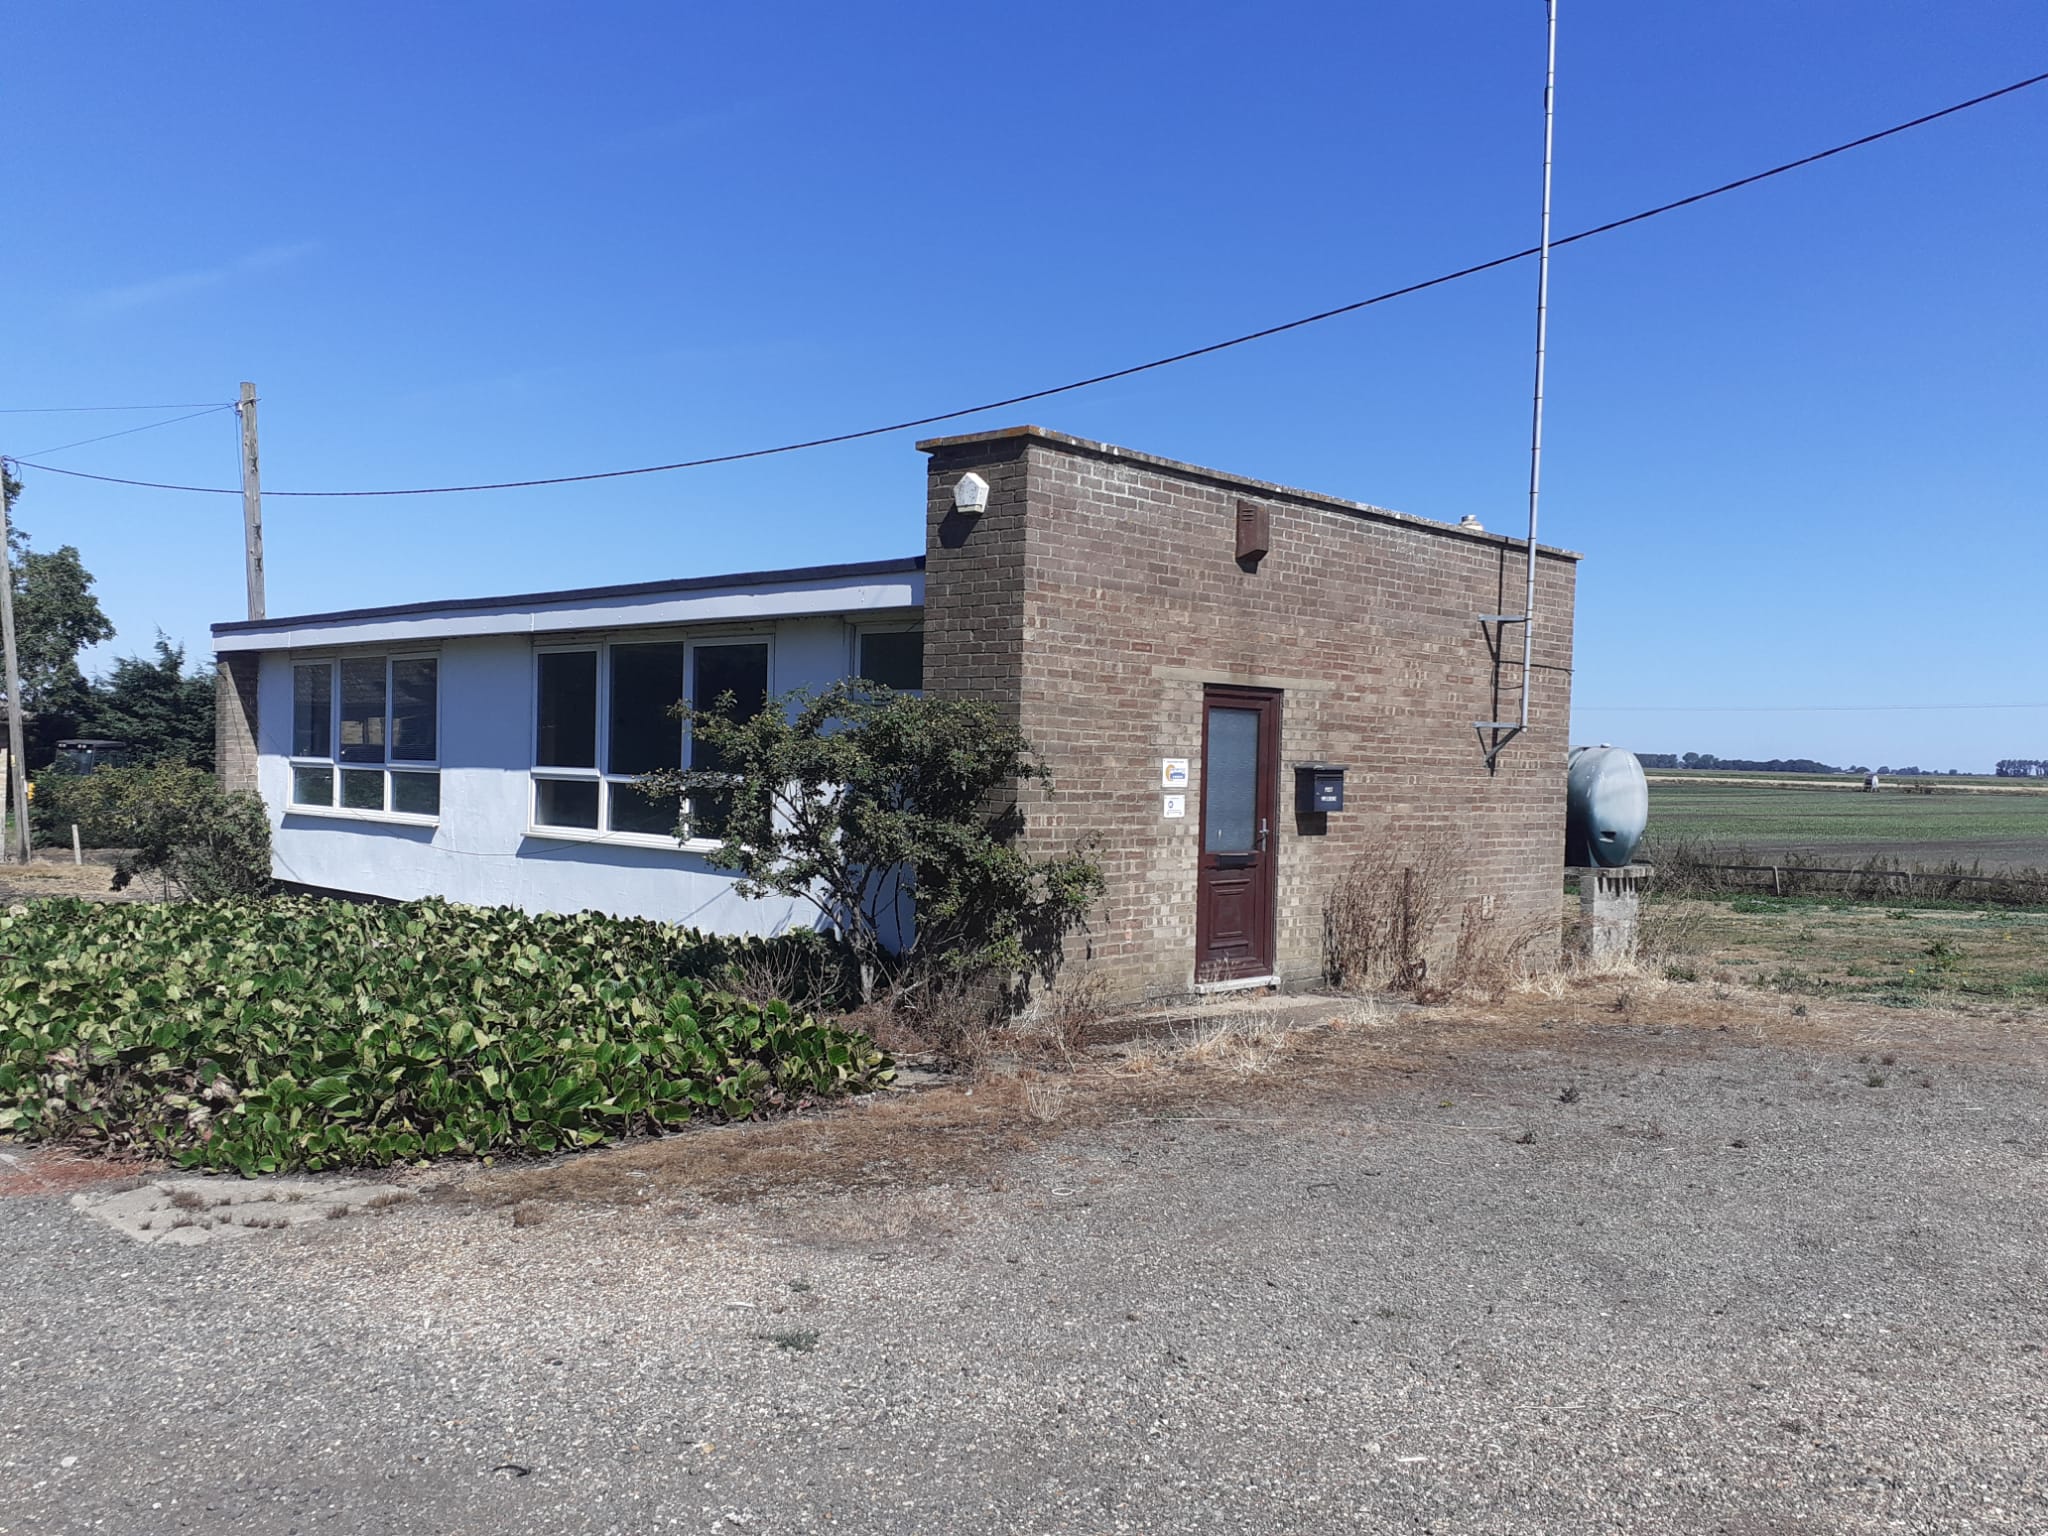 Office to Let on the A1101 near Littleport, Ely, Cambridgeshire